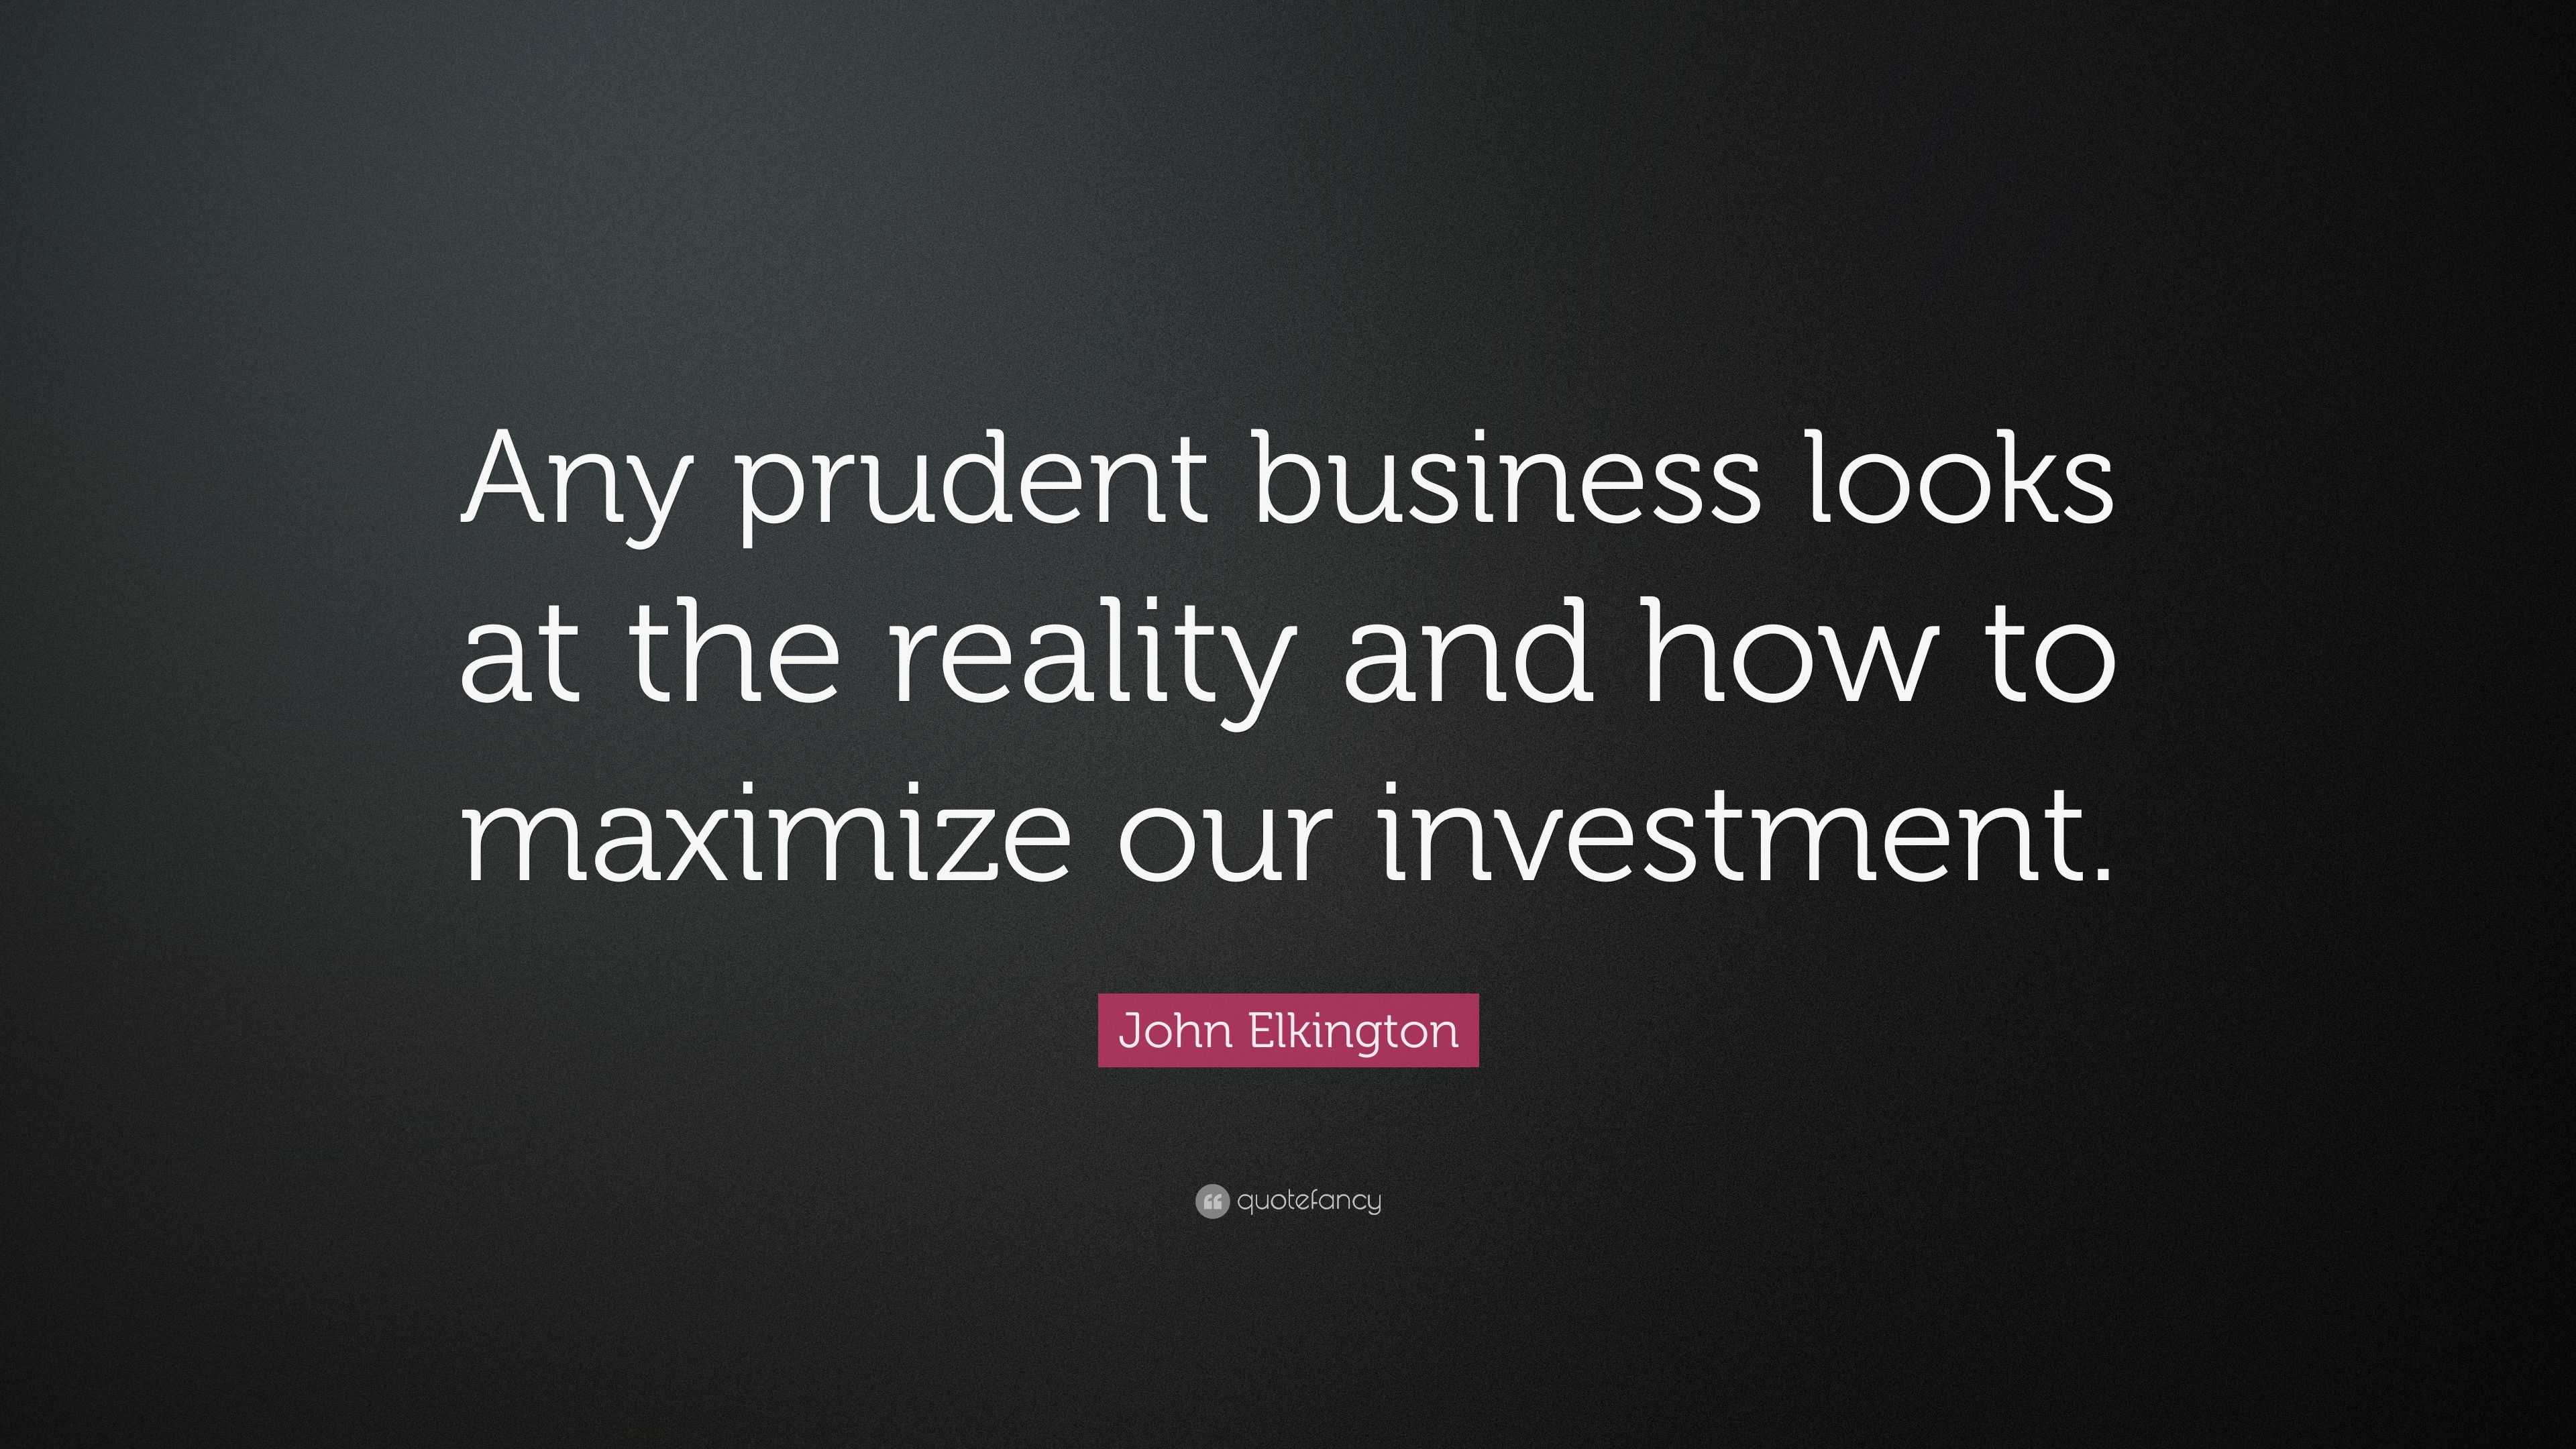 John Elkington Quote: “Any prudent business looks at the reality and ...